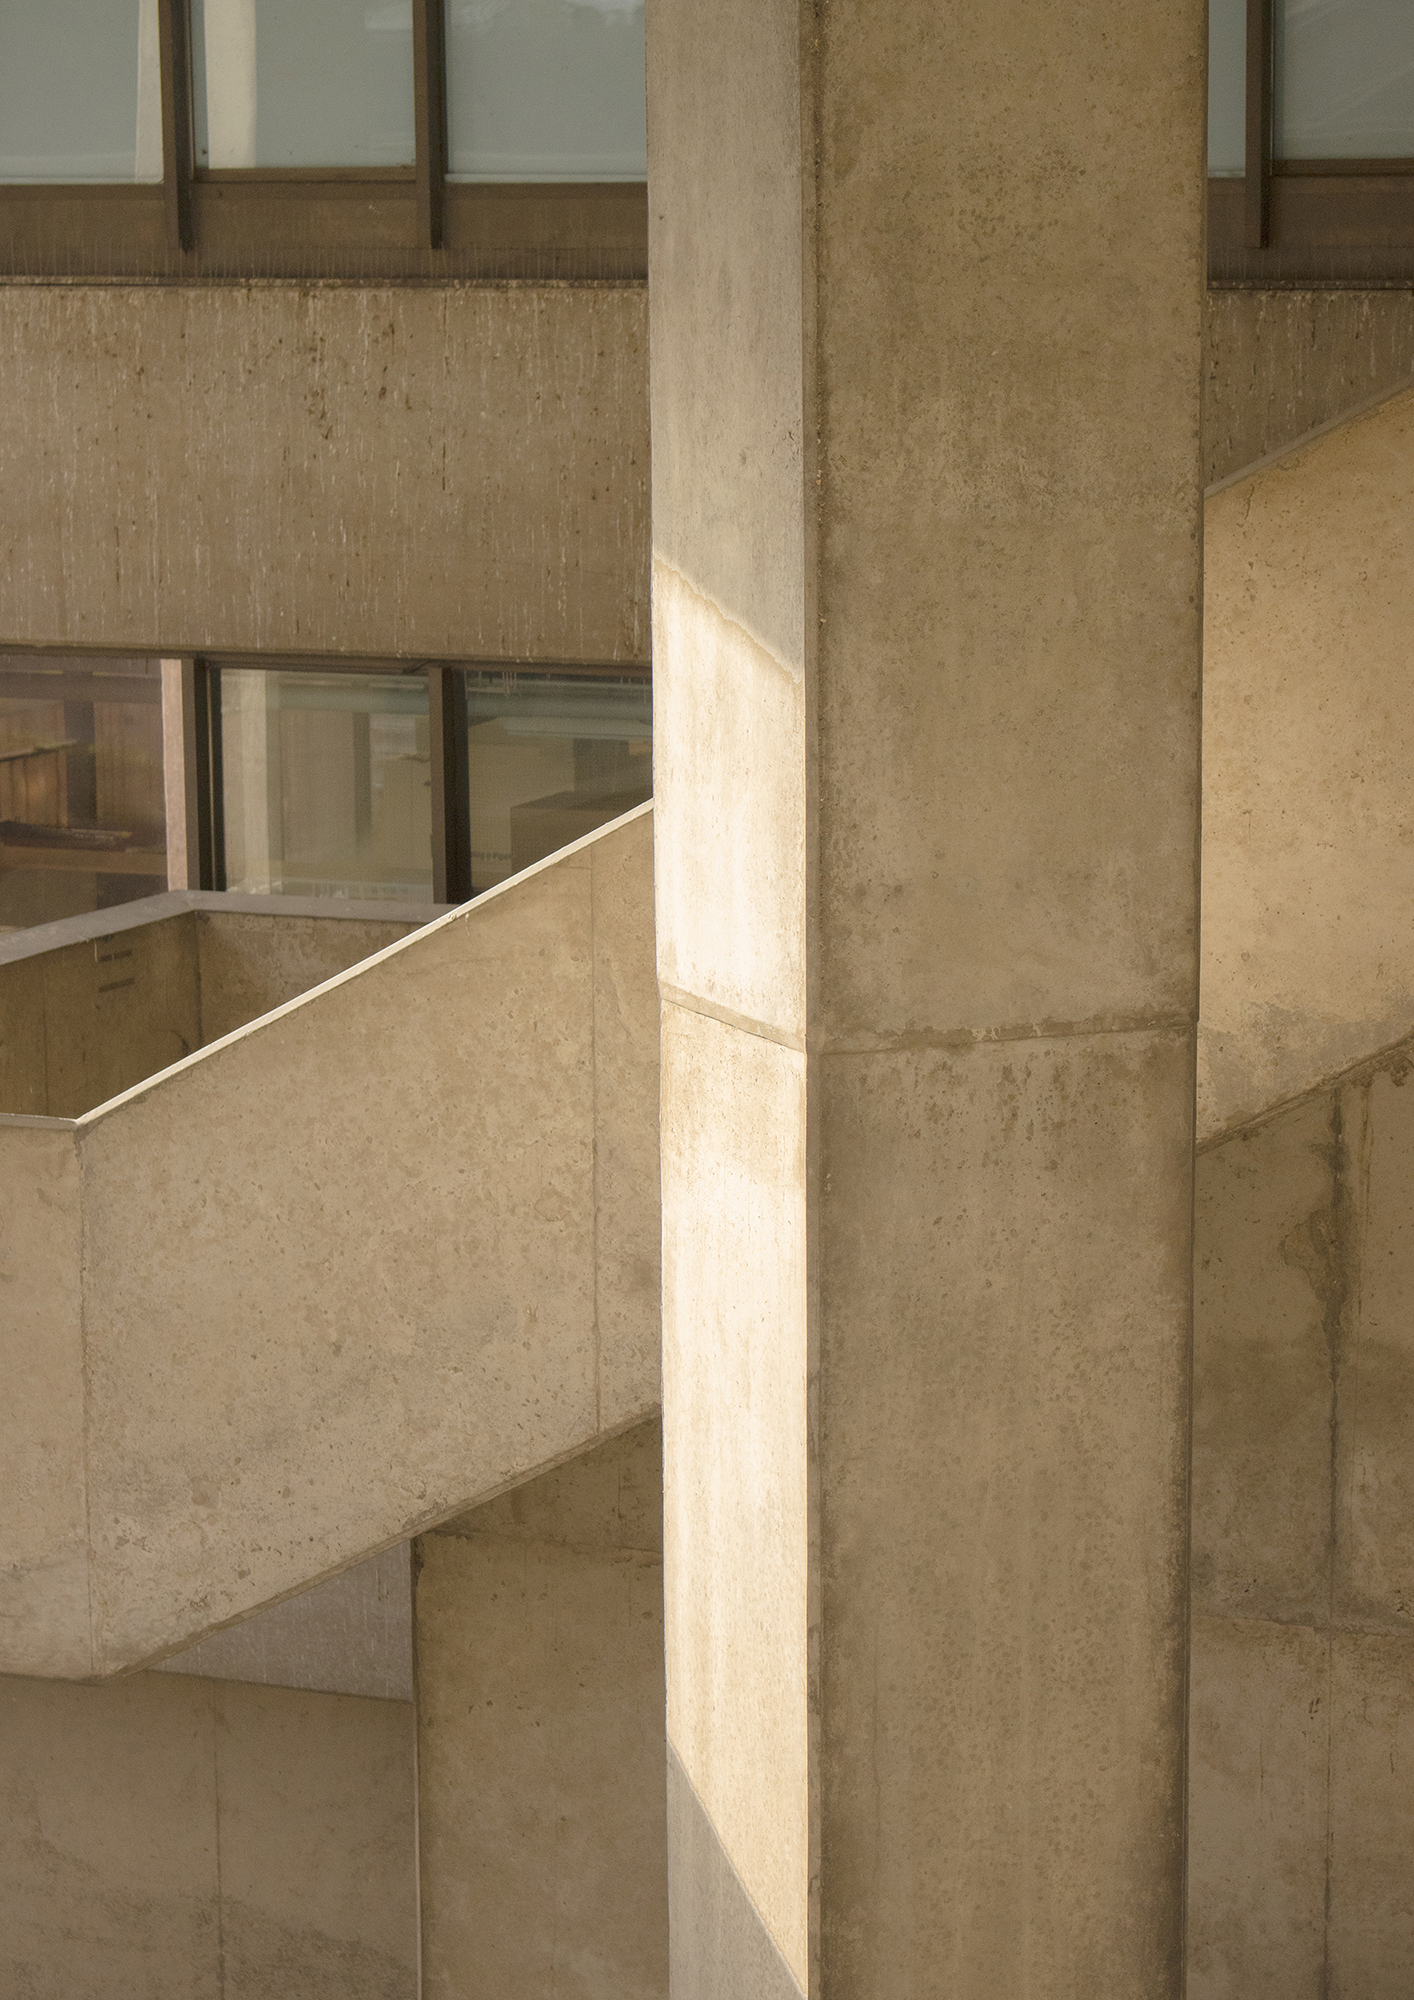 Brutalism, by Anuschka Toogood, using light to emphasise brutalist architecture